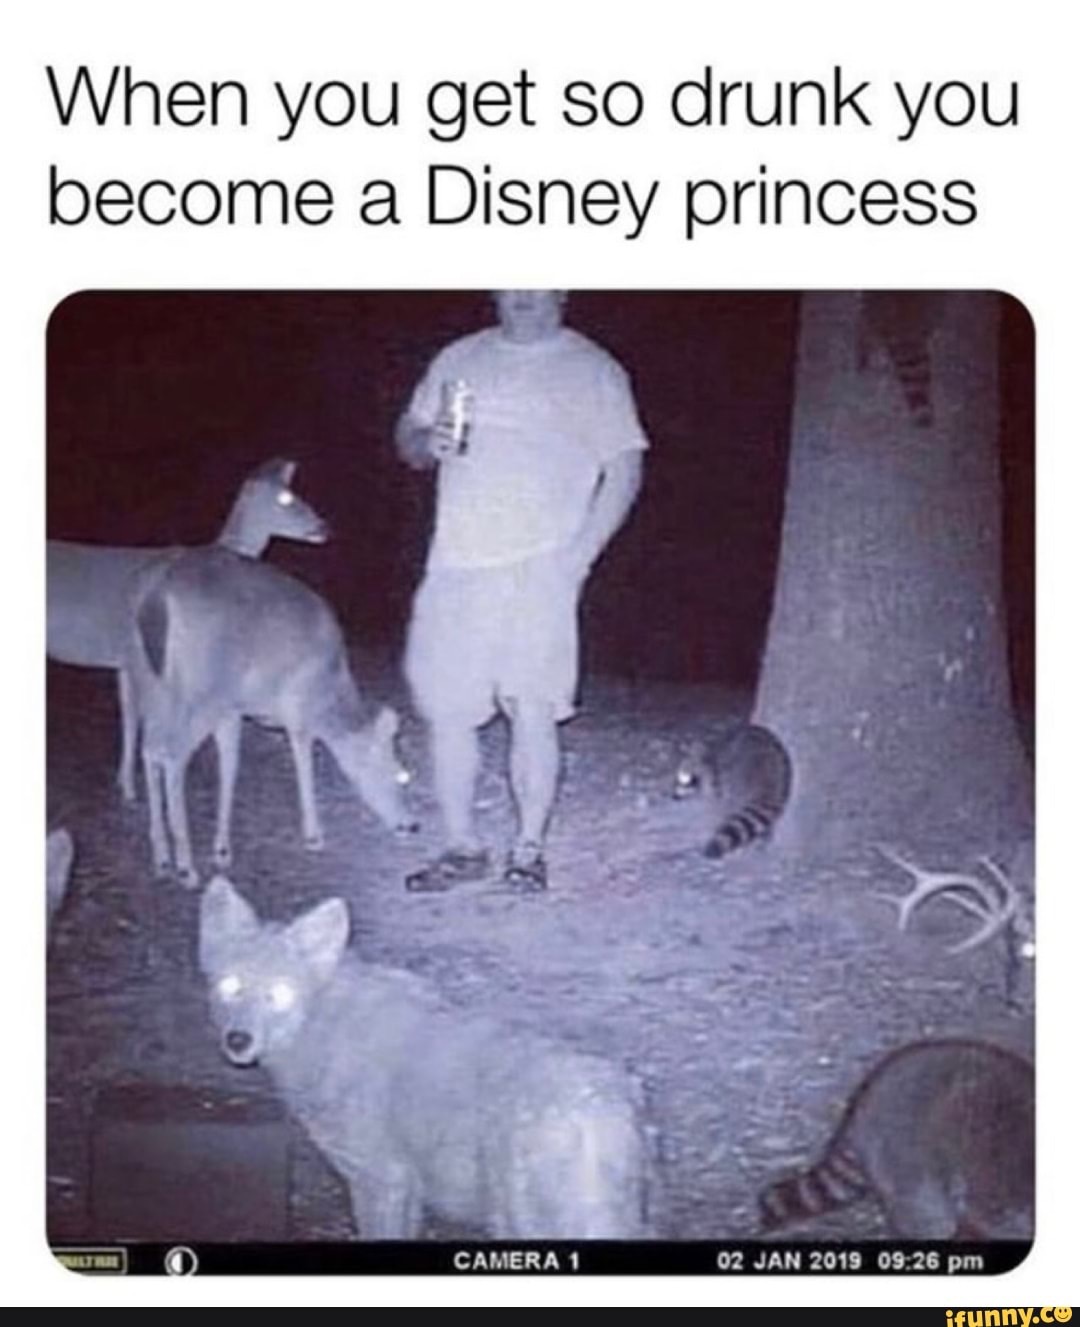 funny drunk memes 2019 - When you get so drunk you become a Disney princess Camera 1 ifunny.co